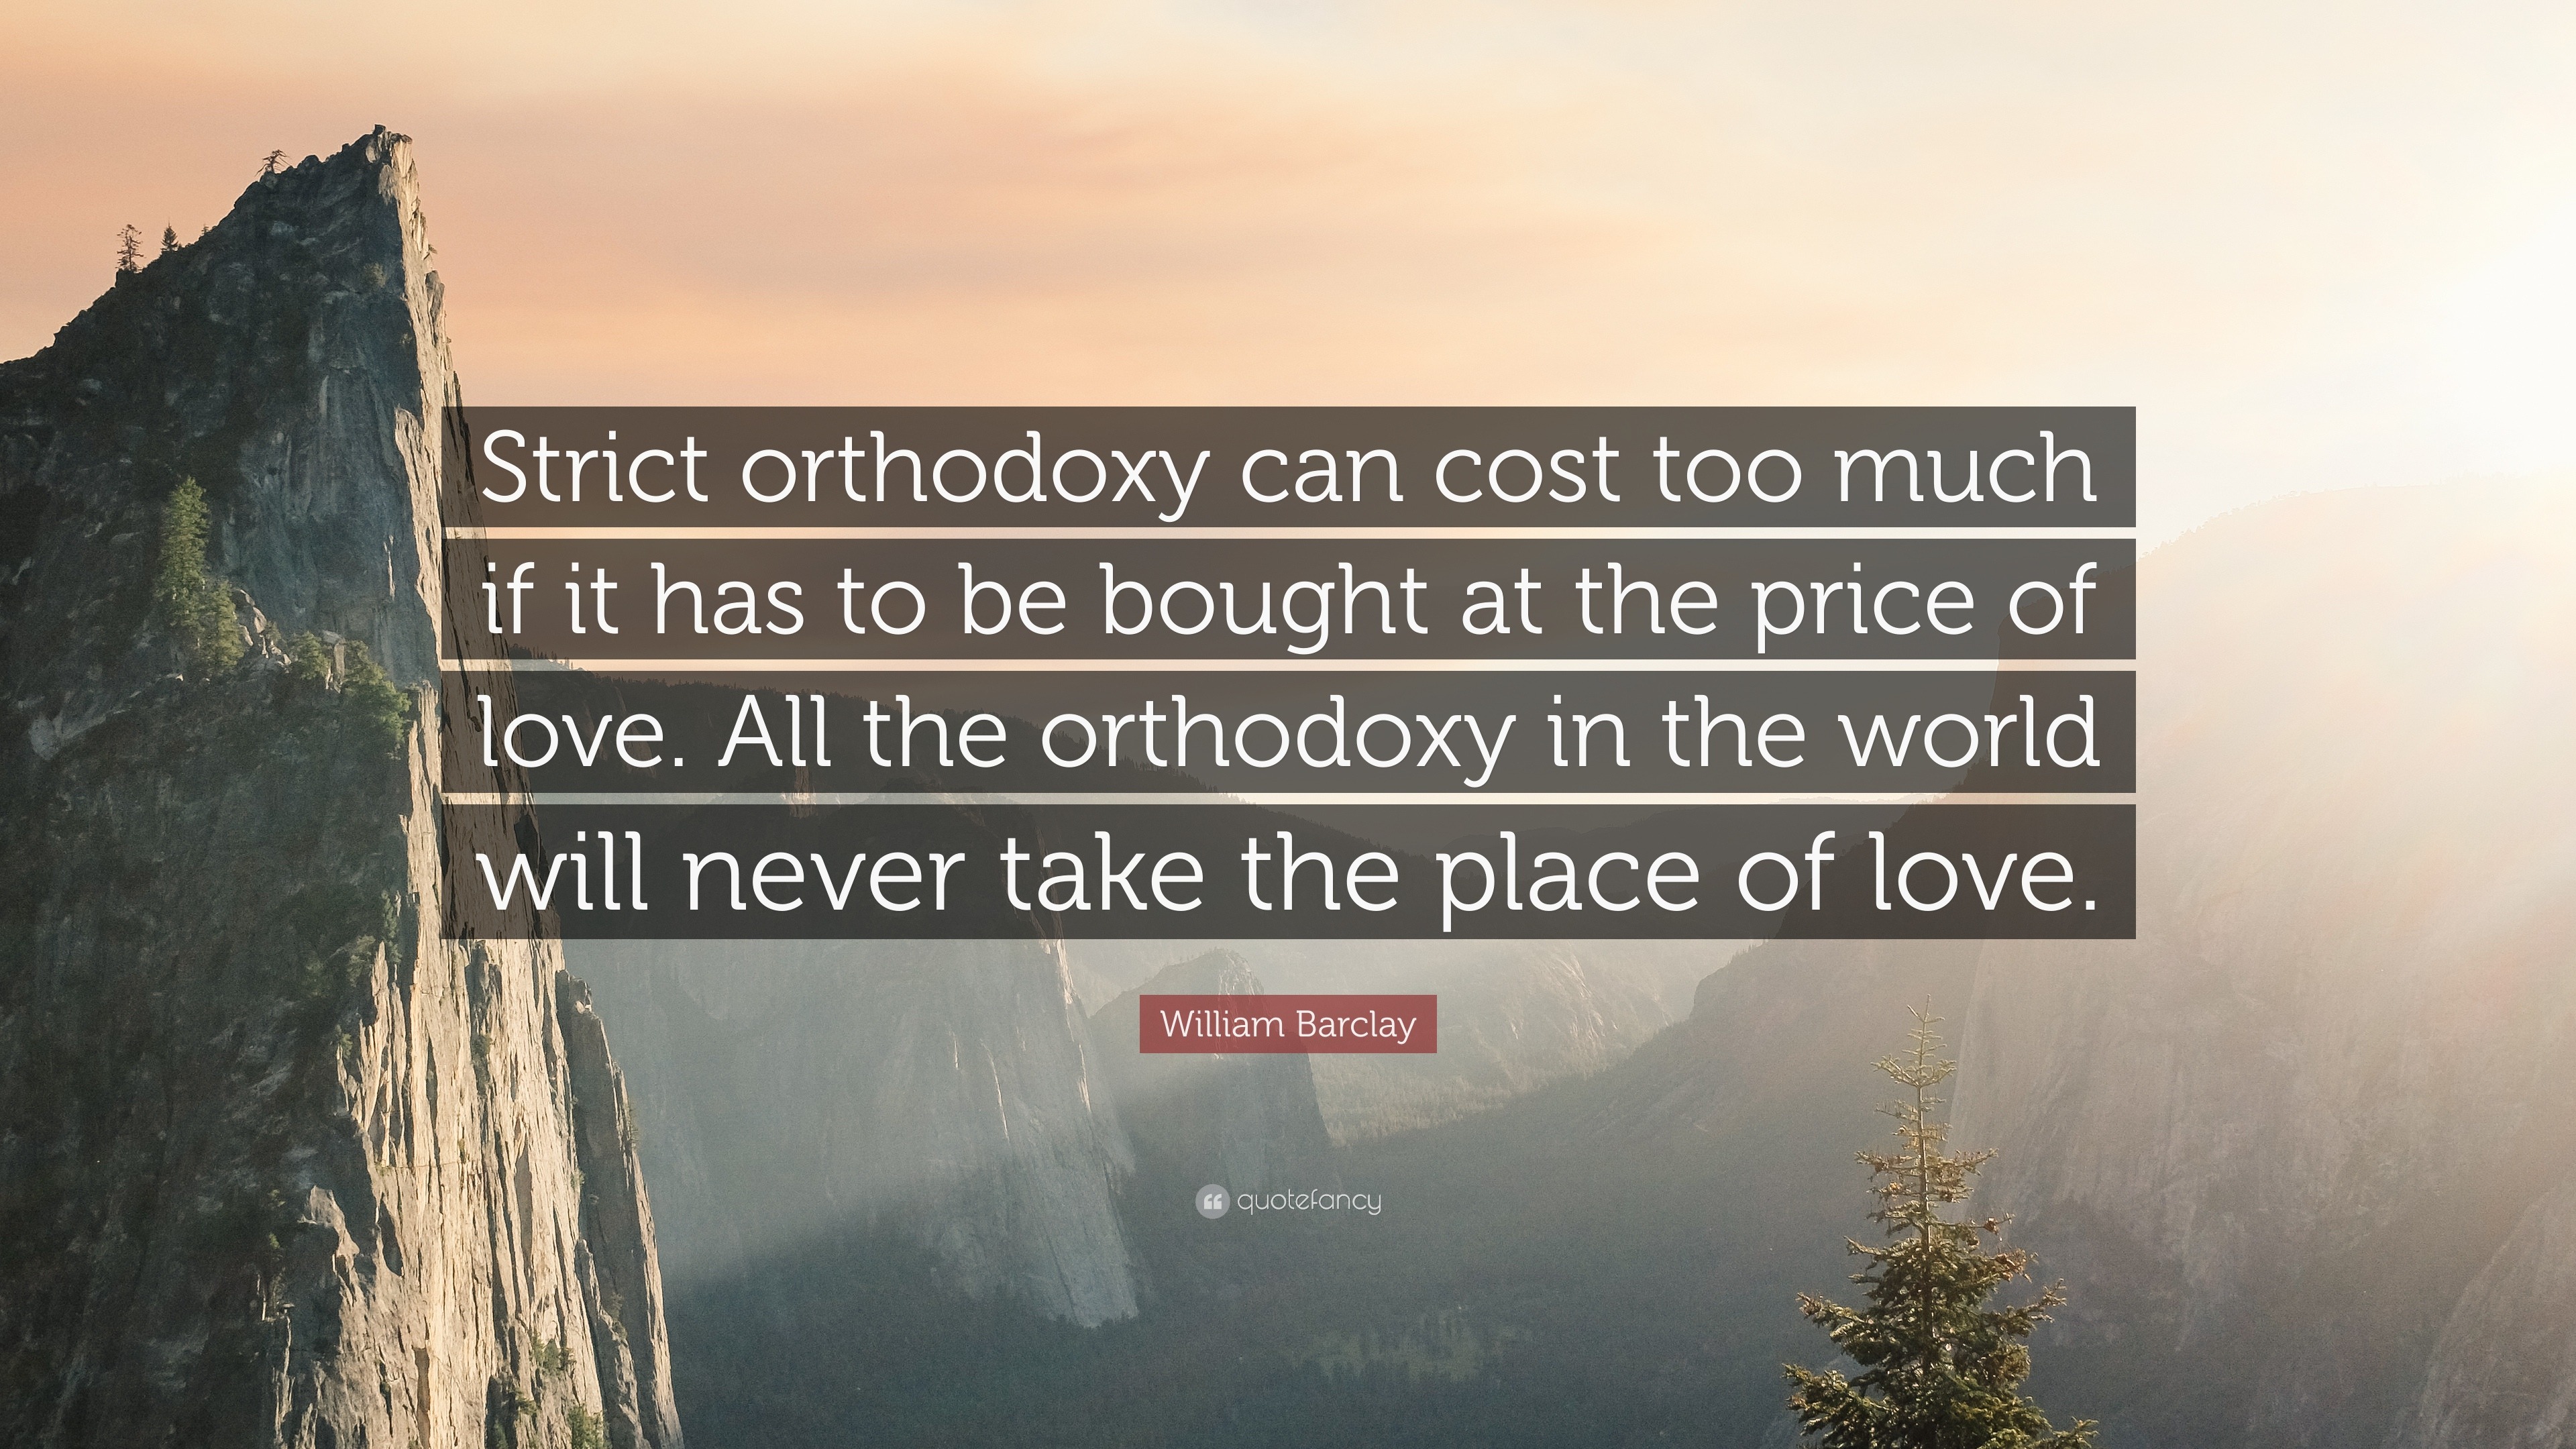 William Barclay Quote “Strict orthodoxy can cost too much if it has to be